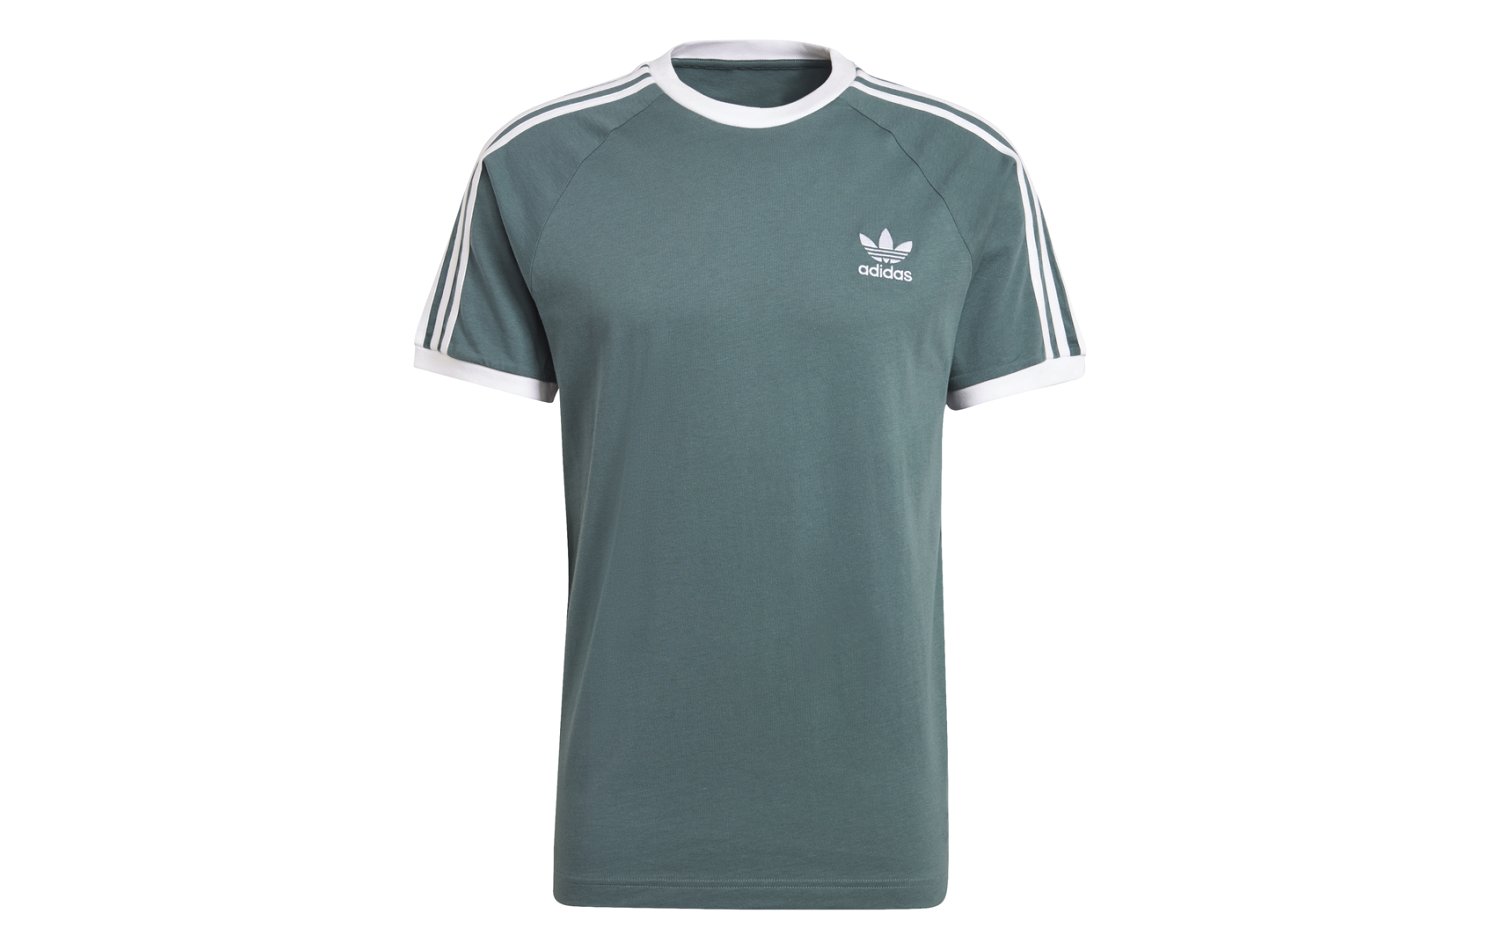 Adidas 3-stripes S/S (GN3479)